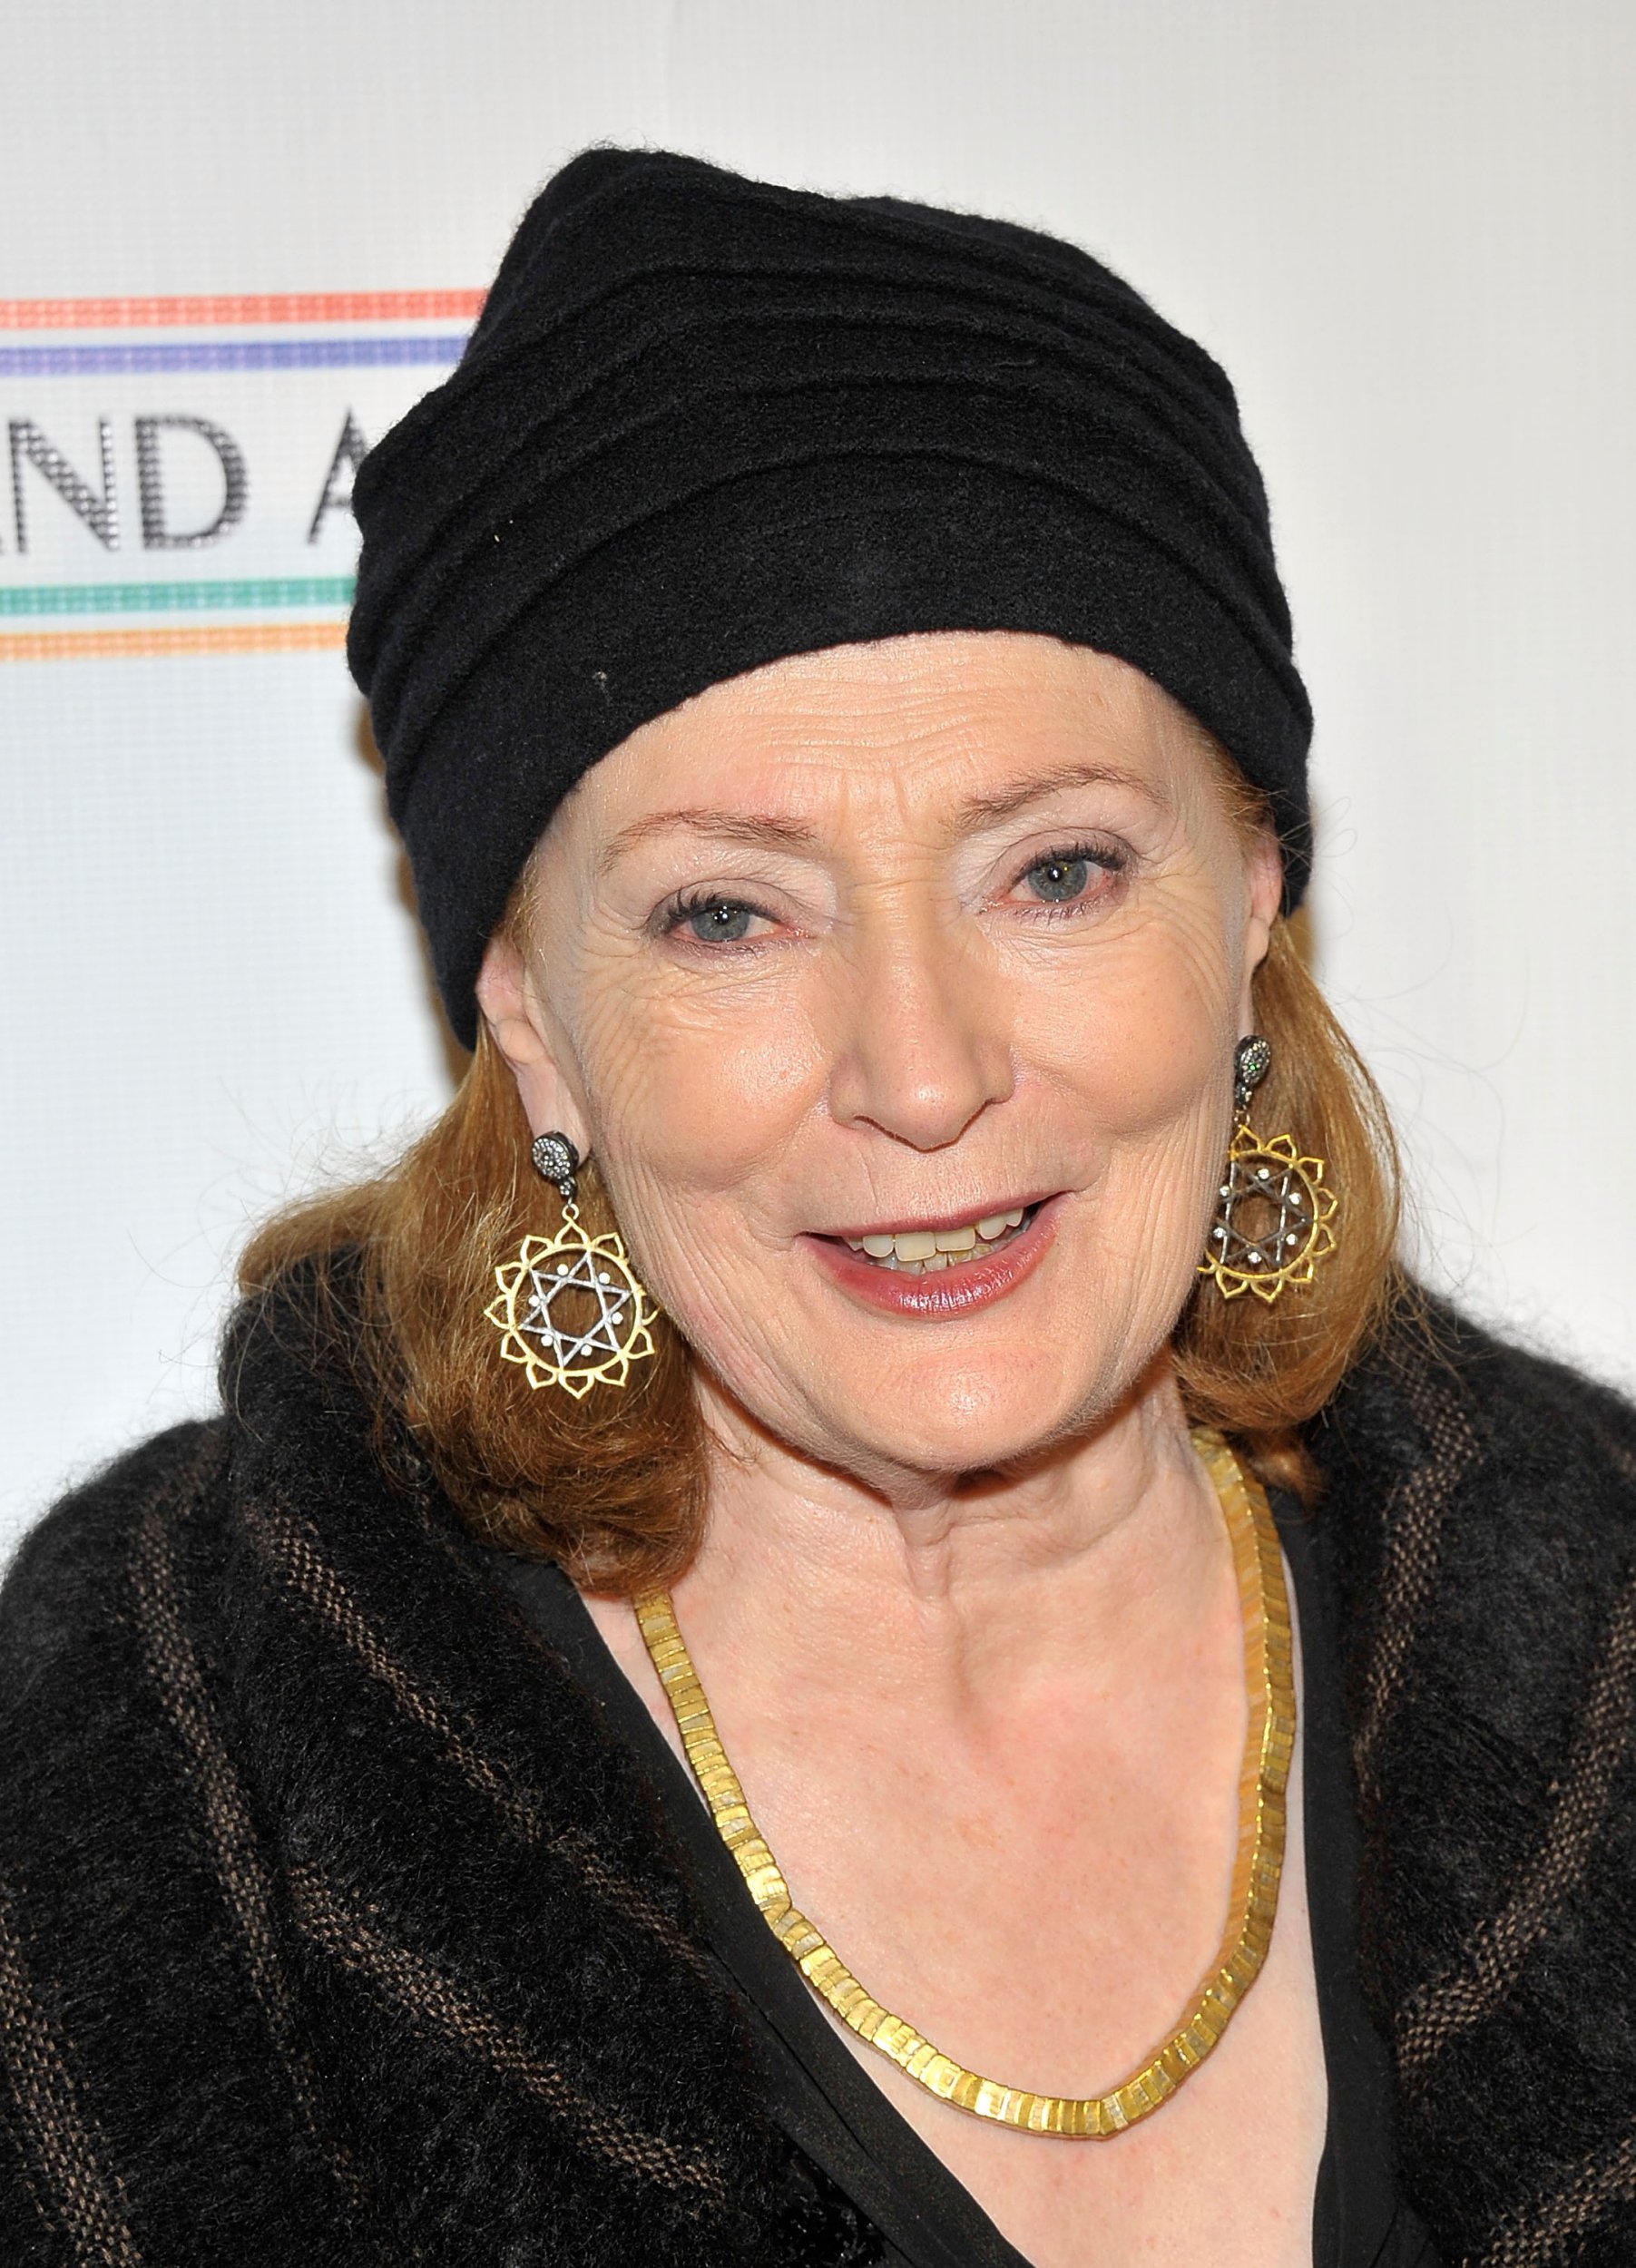 Joan is being celebrated at tonight’s IFTAs with a Lifetime Achievement Award